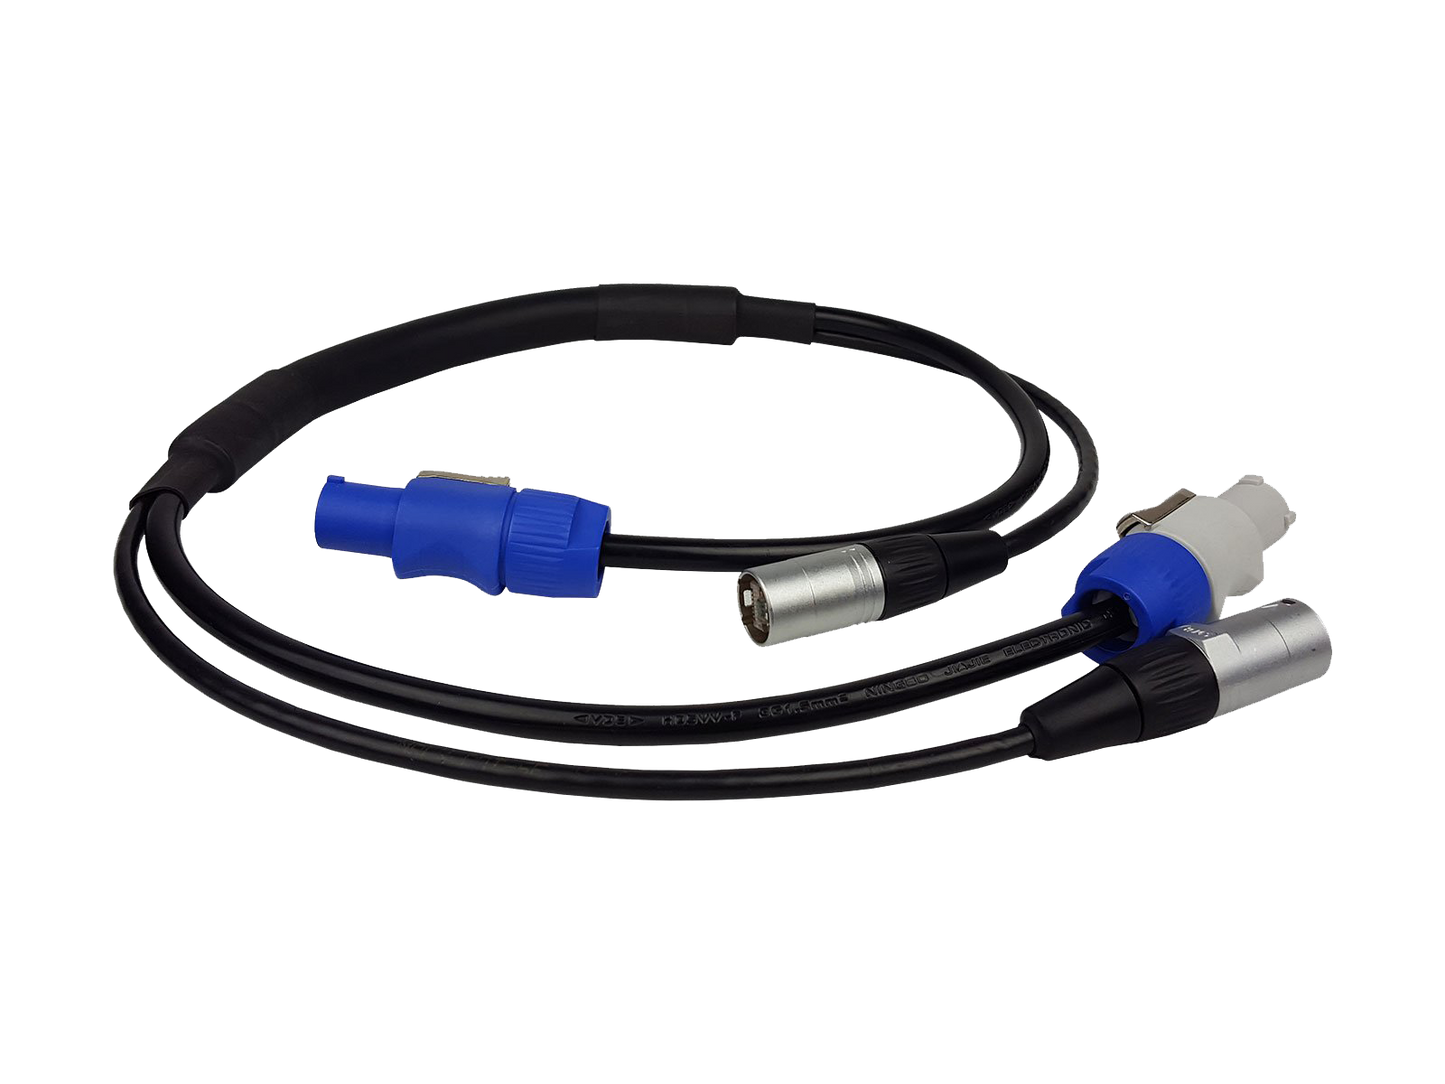 Blizzard Cool Cables EtherCON PowerCON Combo 5'